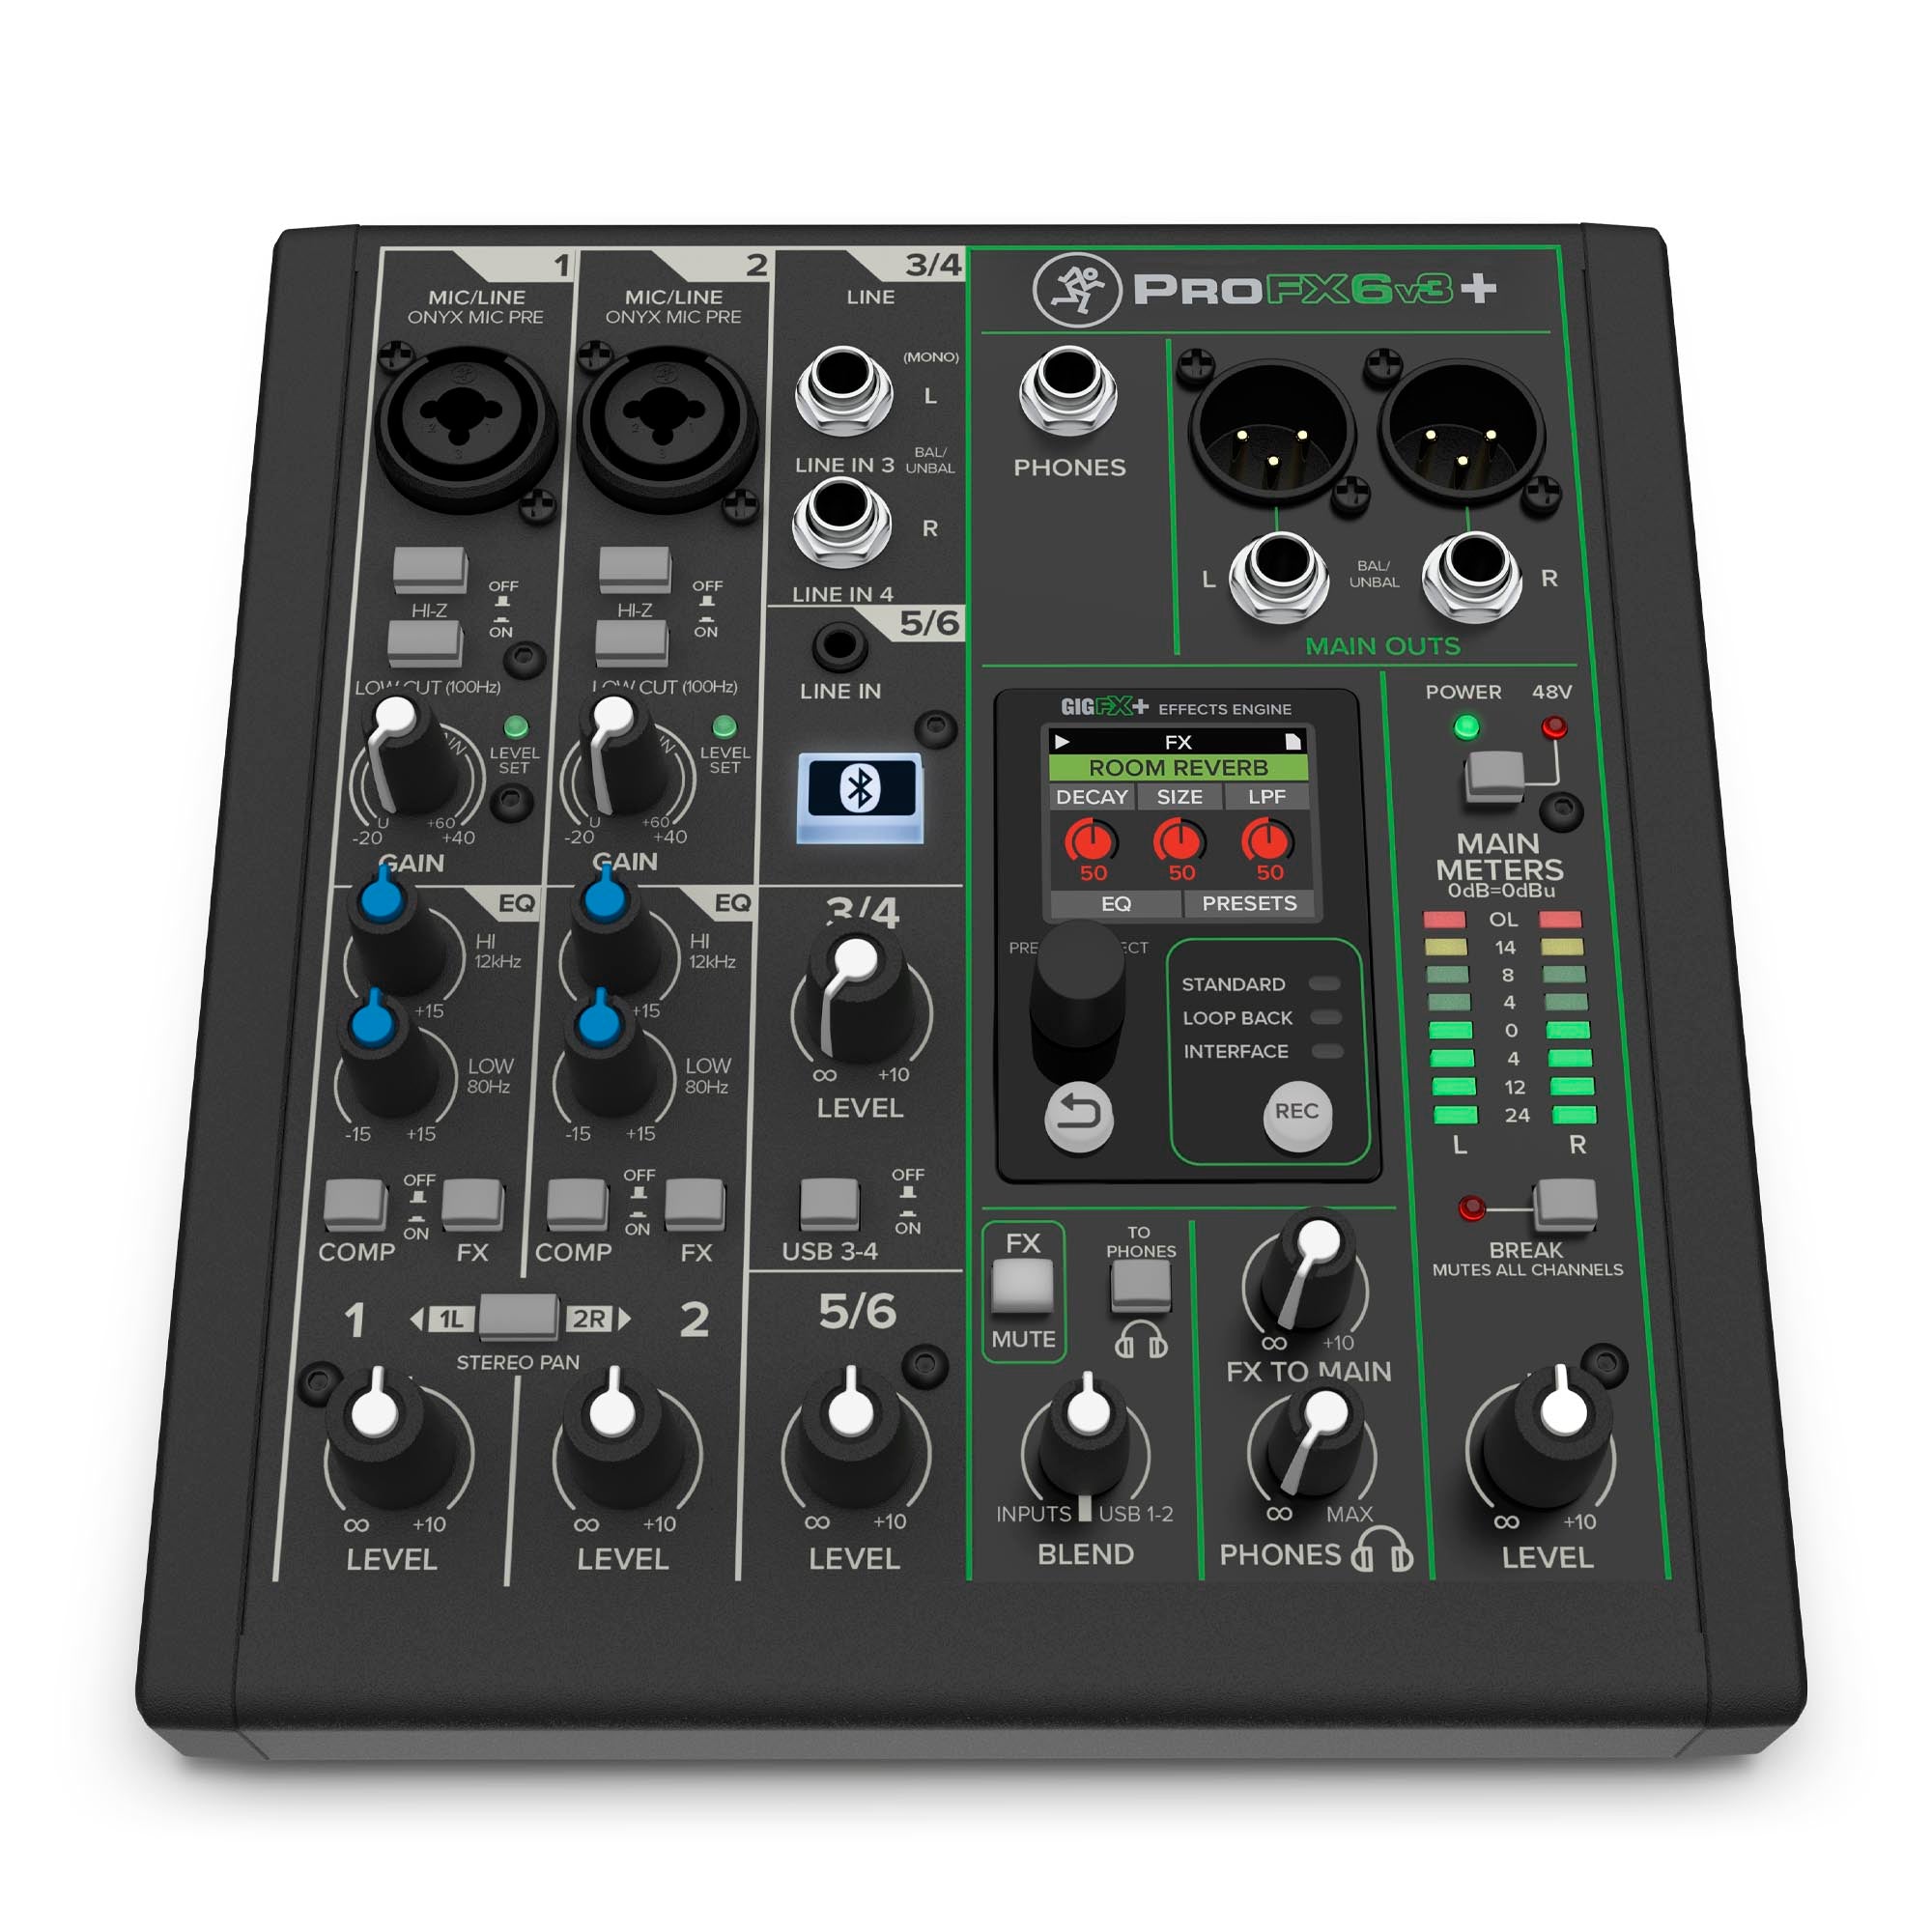 Mackie Profx6v3+ 6-Channel Mixer